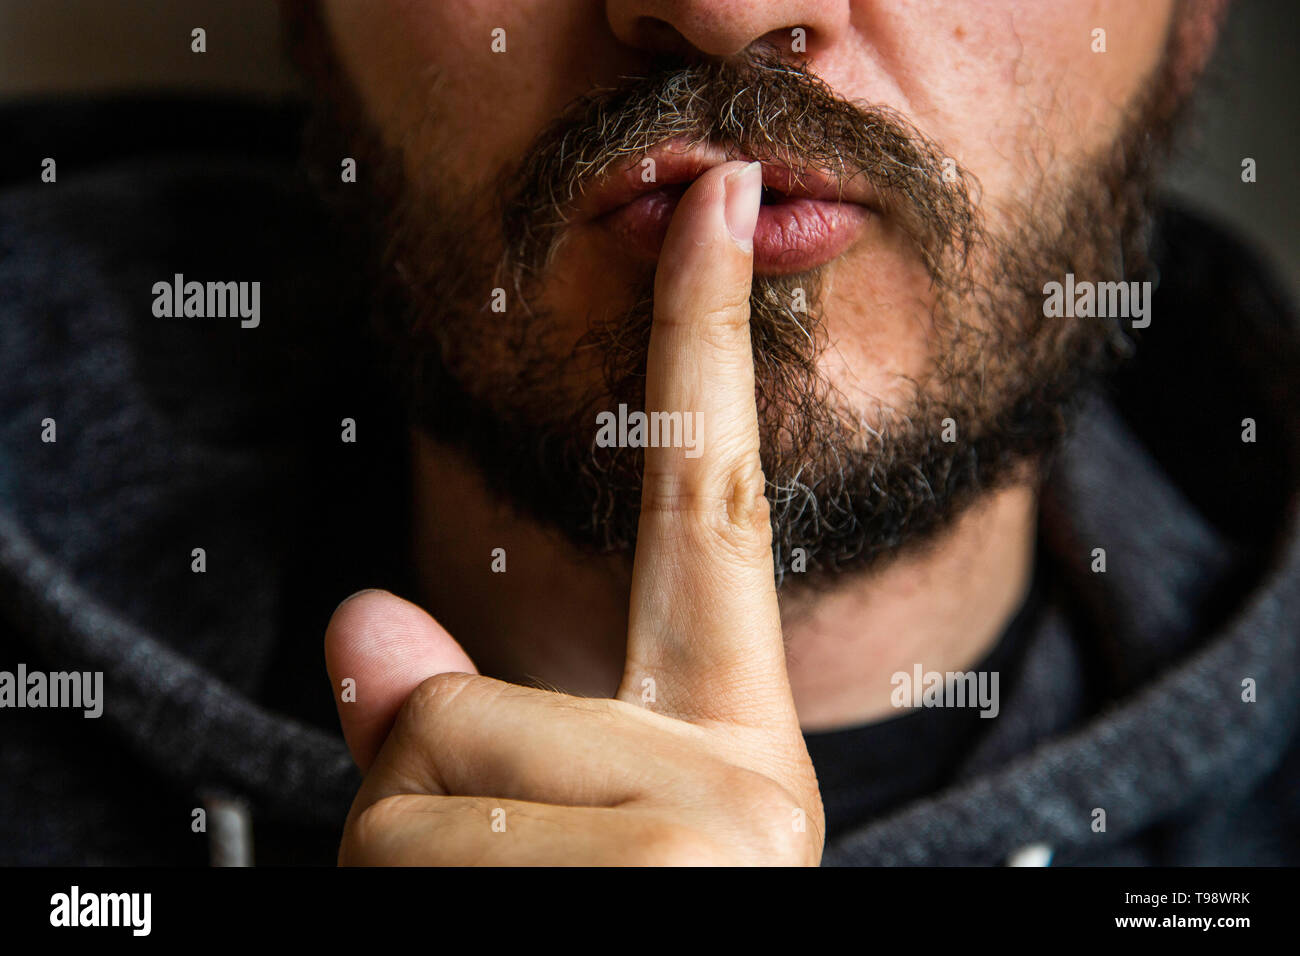 Don't speak, be quiet - close up portrait of bearded man on the door saying shhh. Finger on lips. Head and shoulders, no eyes. Danger. Stock Photo